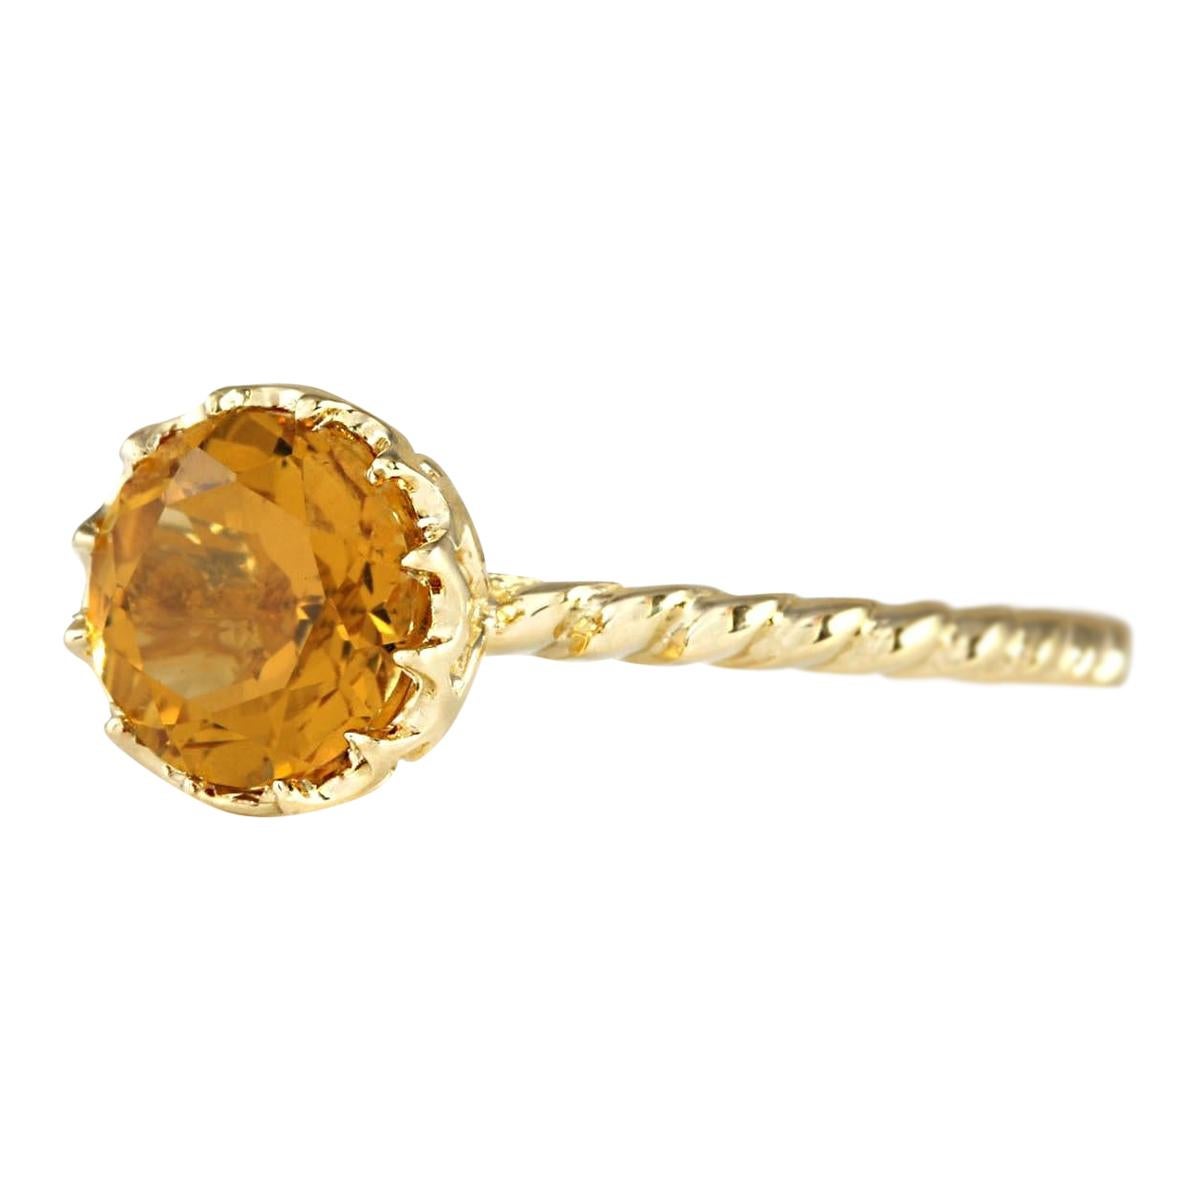 Stamped: 14K Yellow Gold
Total Ring Weight: 1.8 Grams
Total Natural Citrine Weight is 1.50 Carat
Color: Orange
Face Measures: 8.00x8.00 mm
Sku: [703263W]